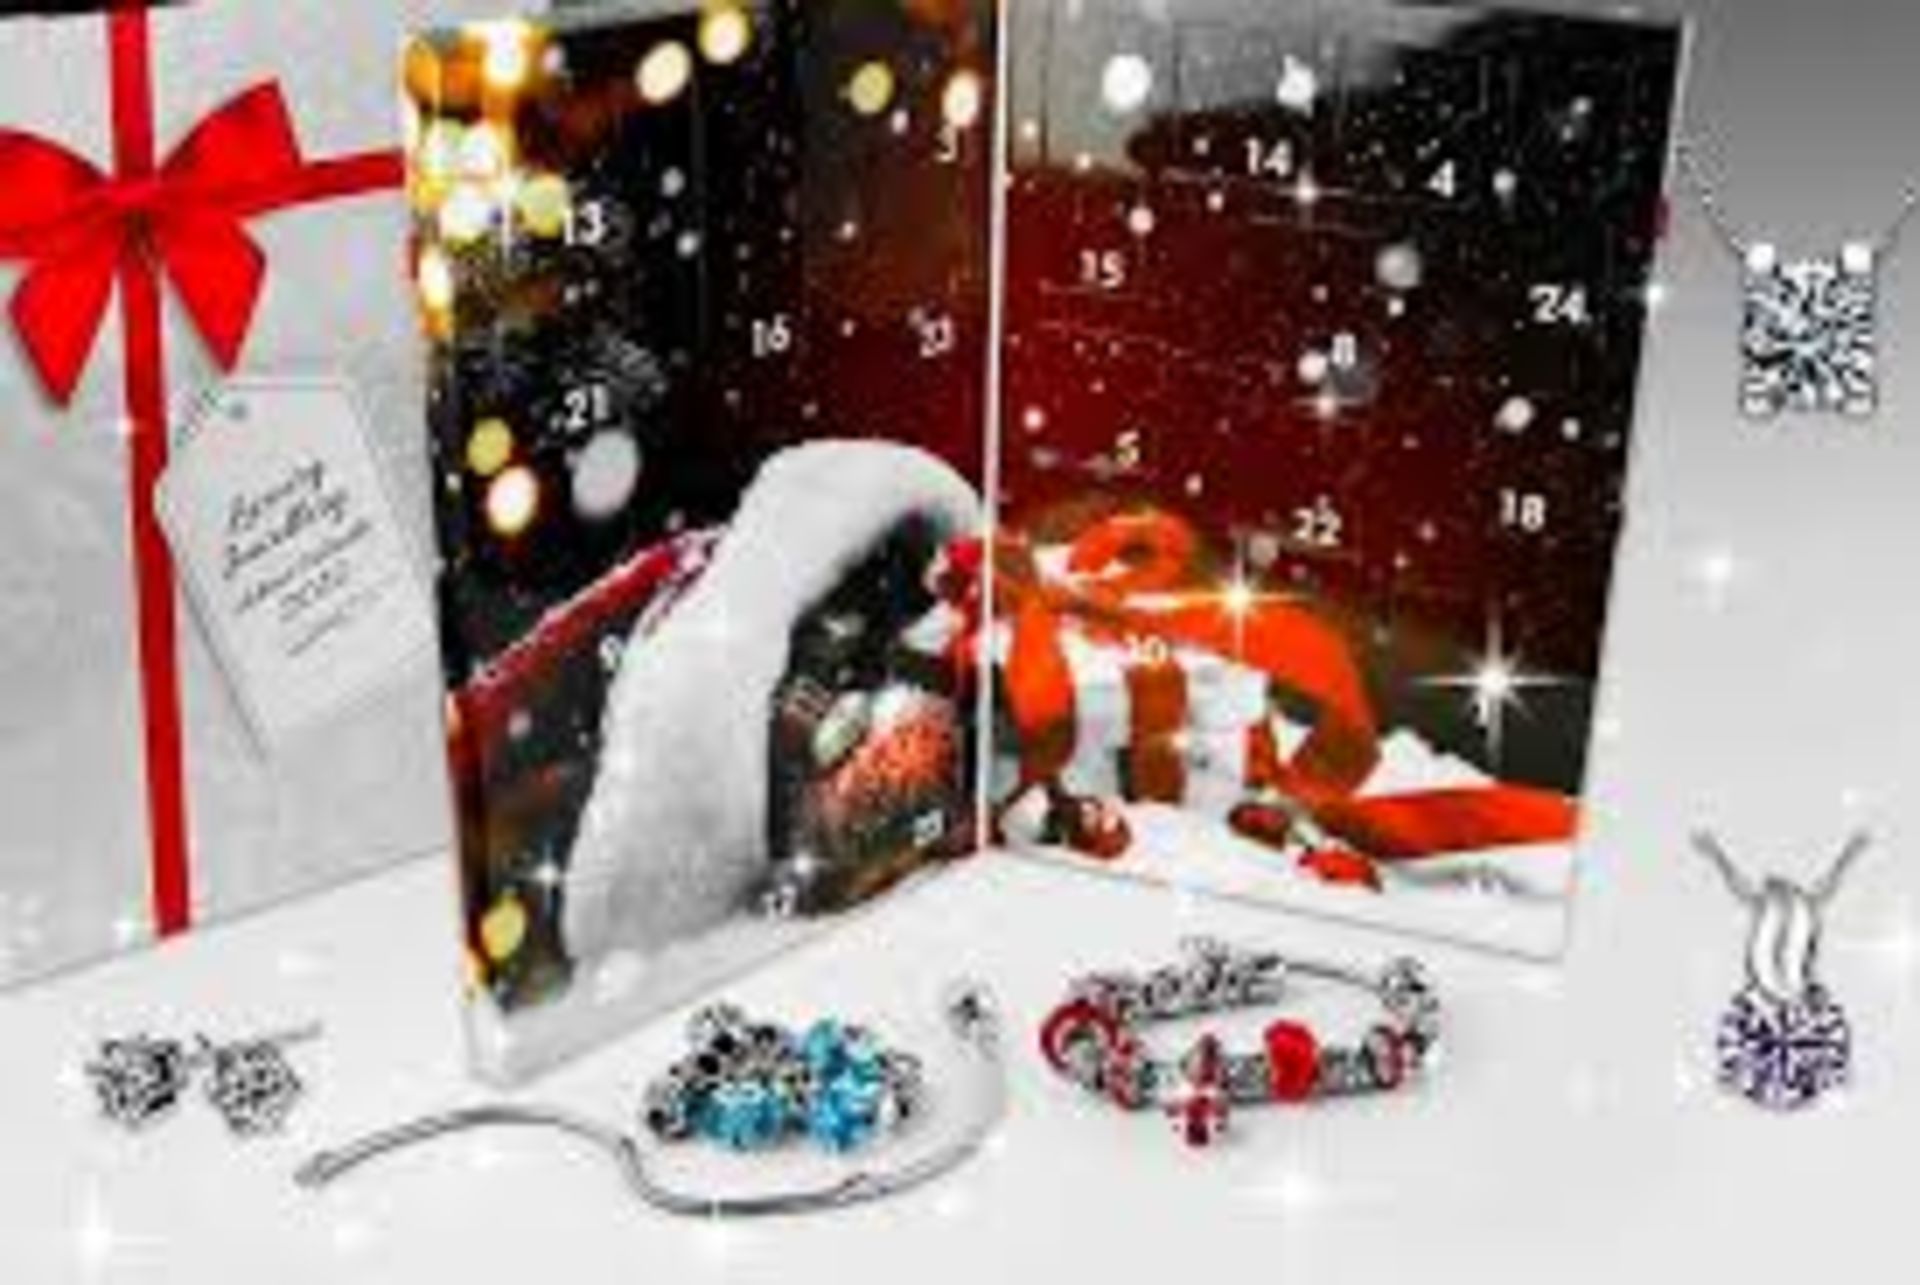 NO VAT!! Brand New Fifth NYC Luxury Jewellery Advent Calender, RRP £199, The ideal Christmas gift,